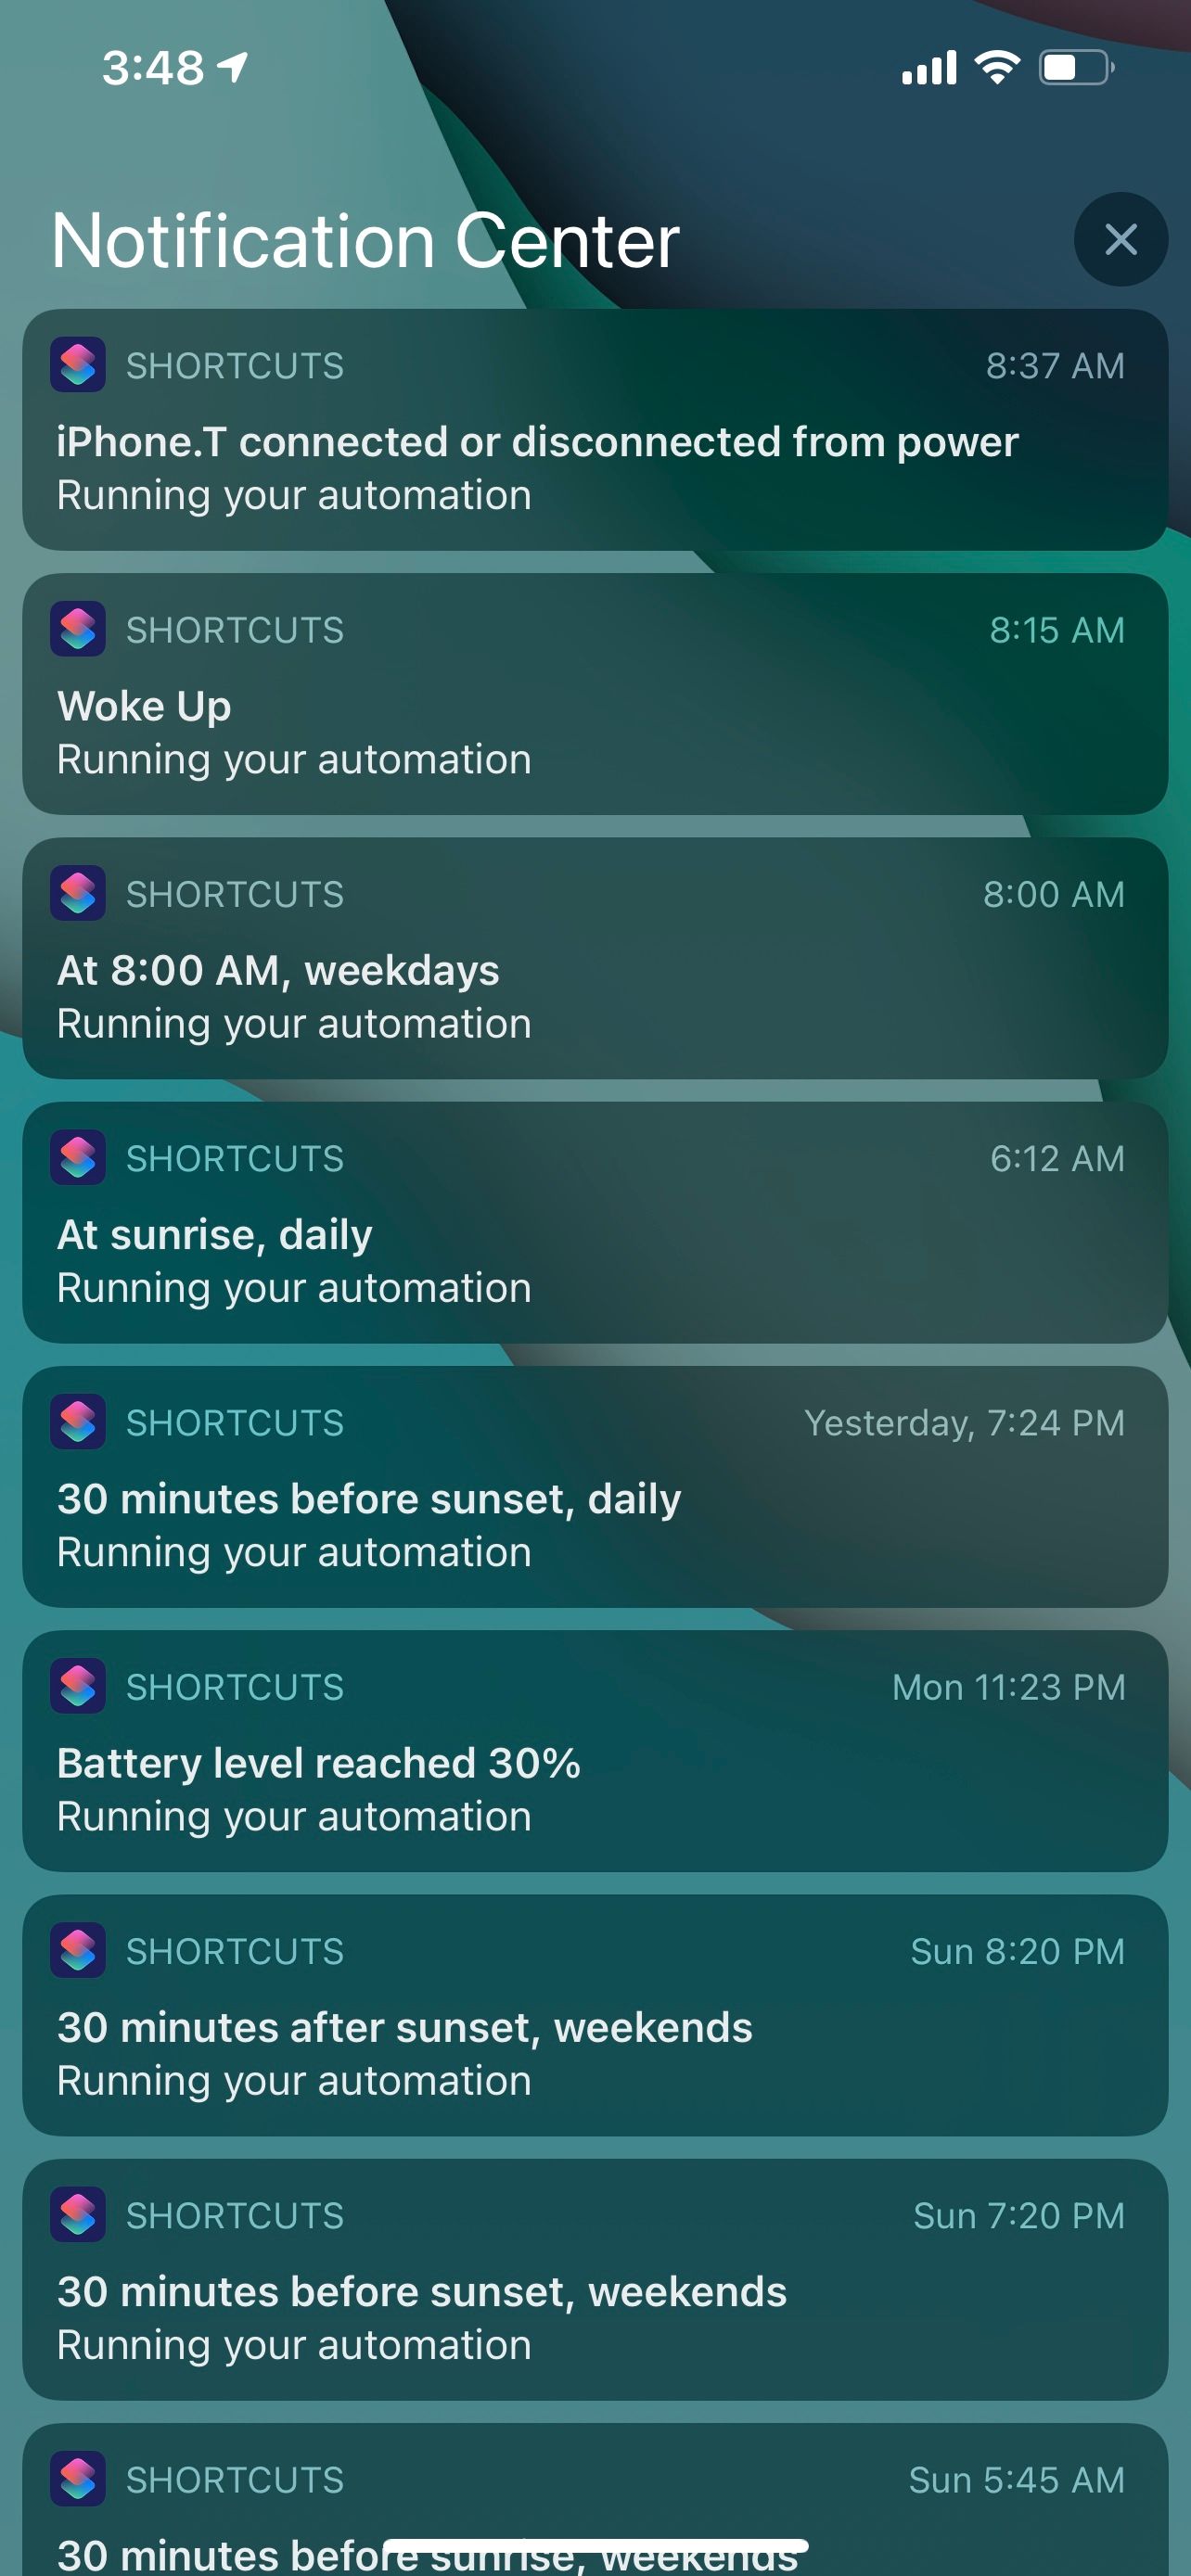 List of Shortcuts notifications on the Lock Screen